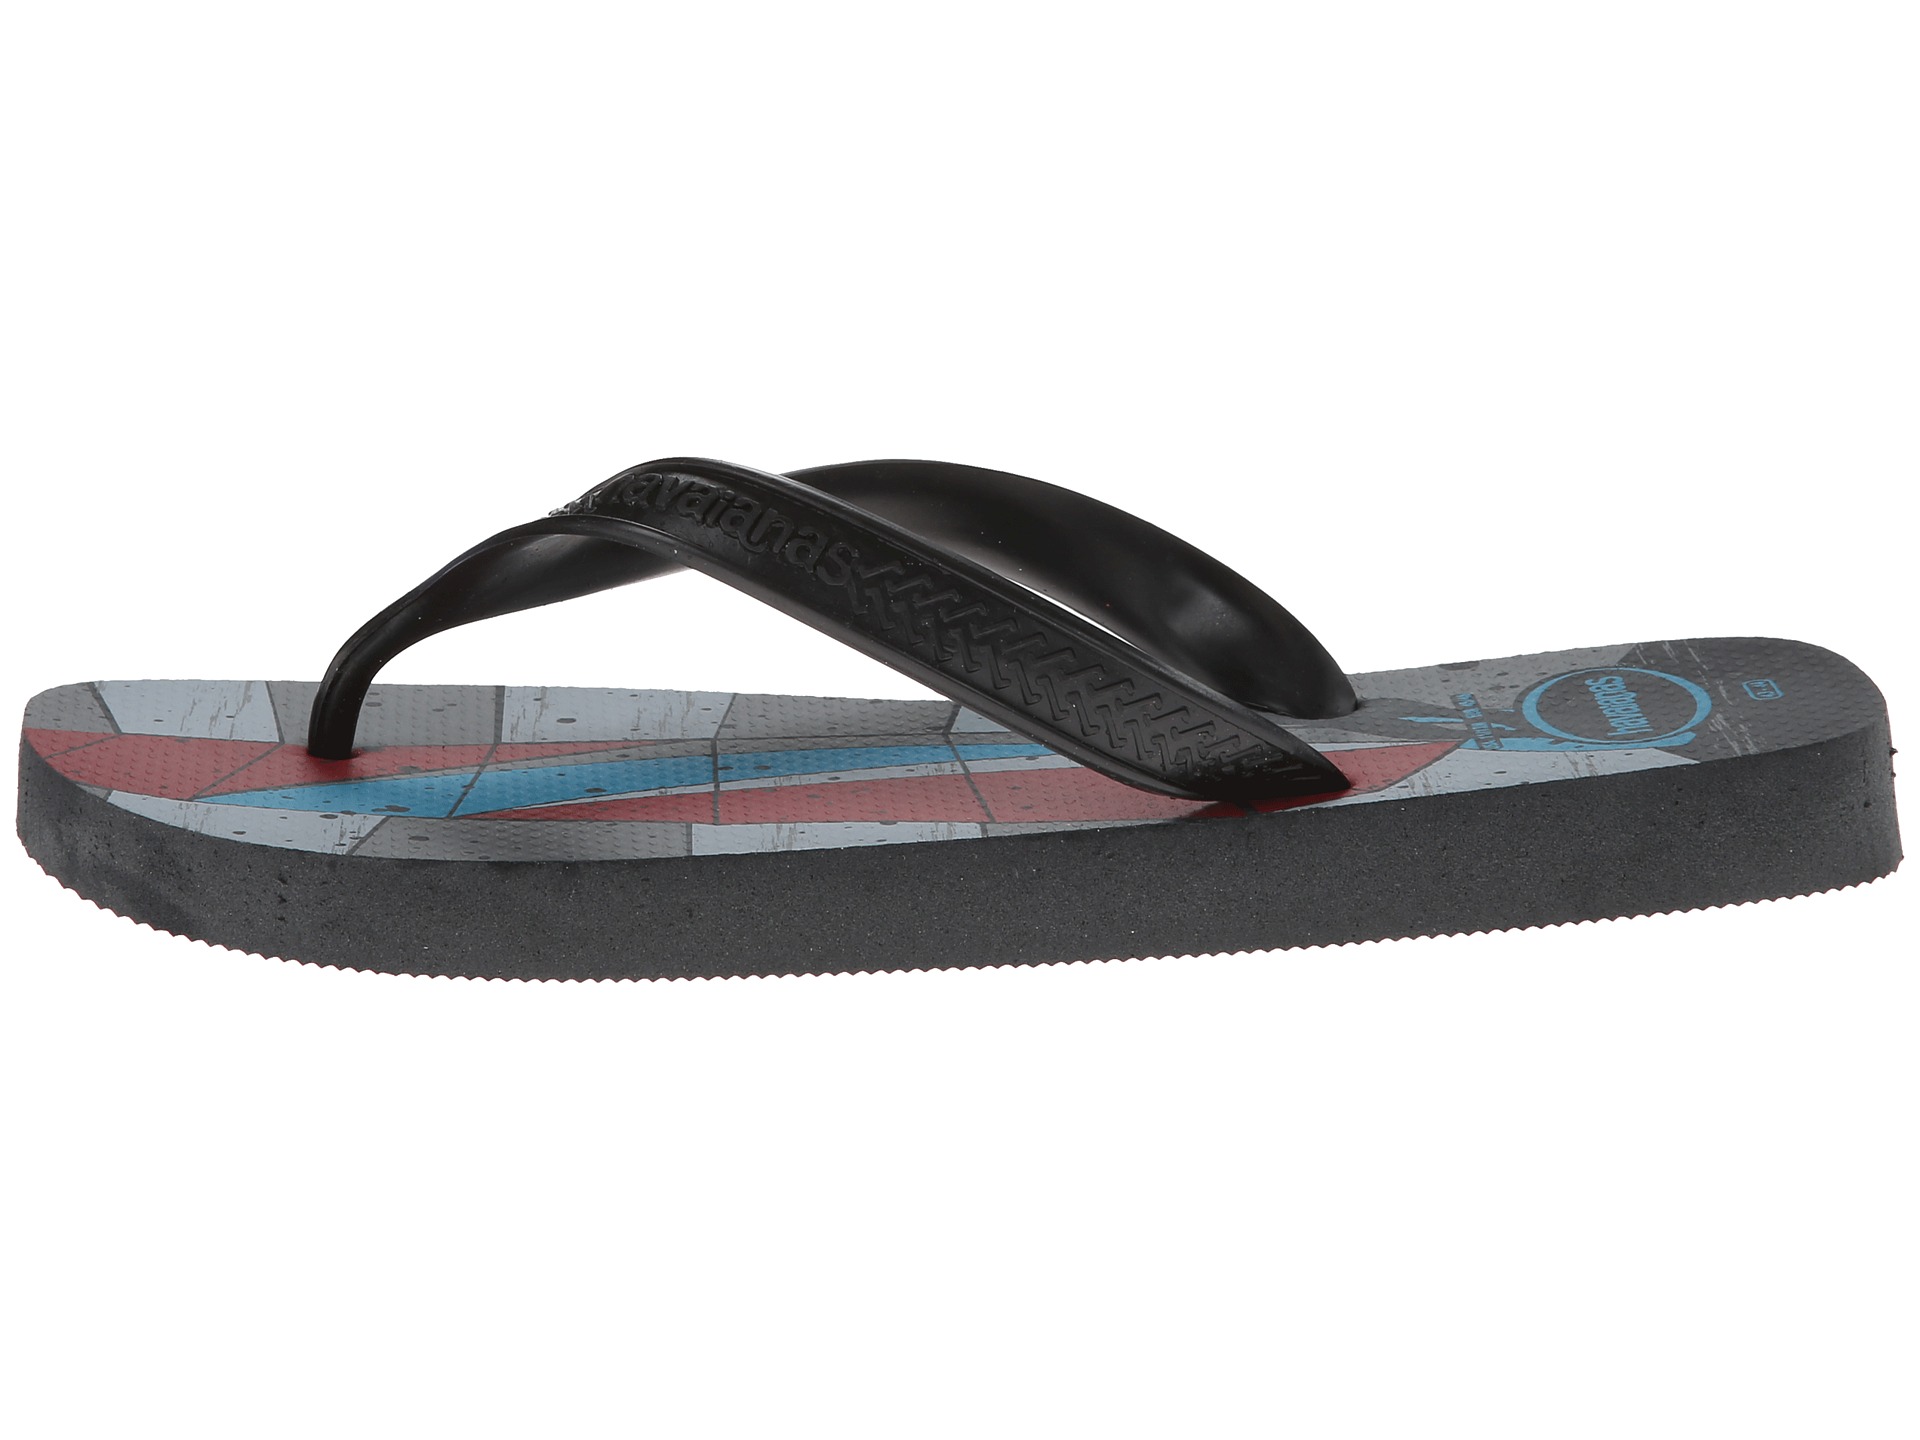 Havaianas Surf Flip Flops | Shipped Free at Zappos